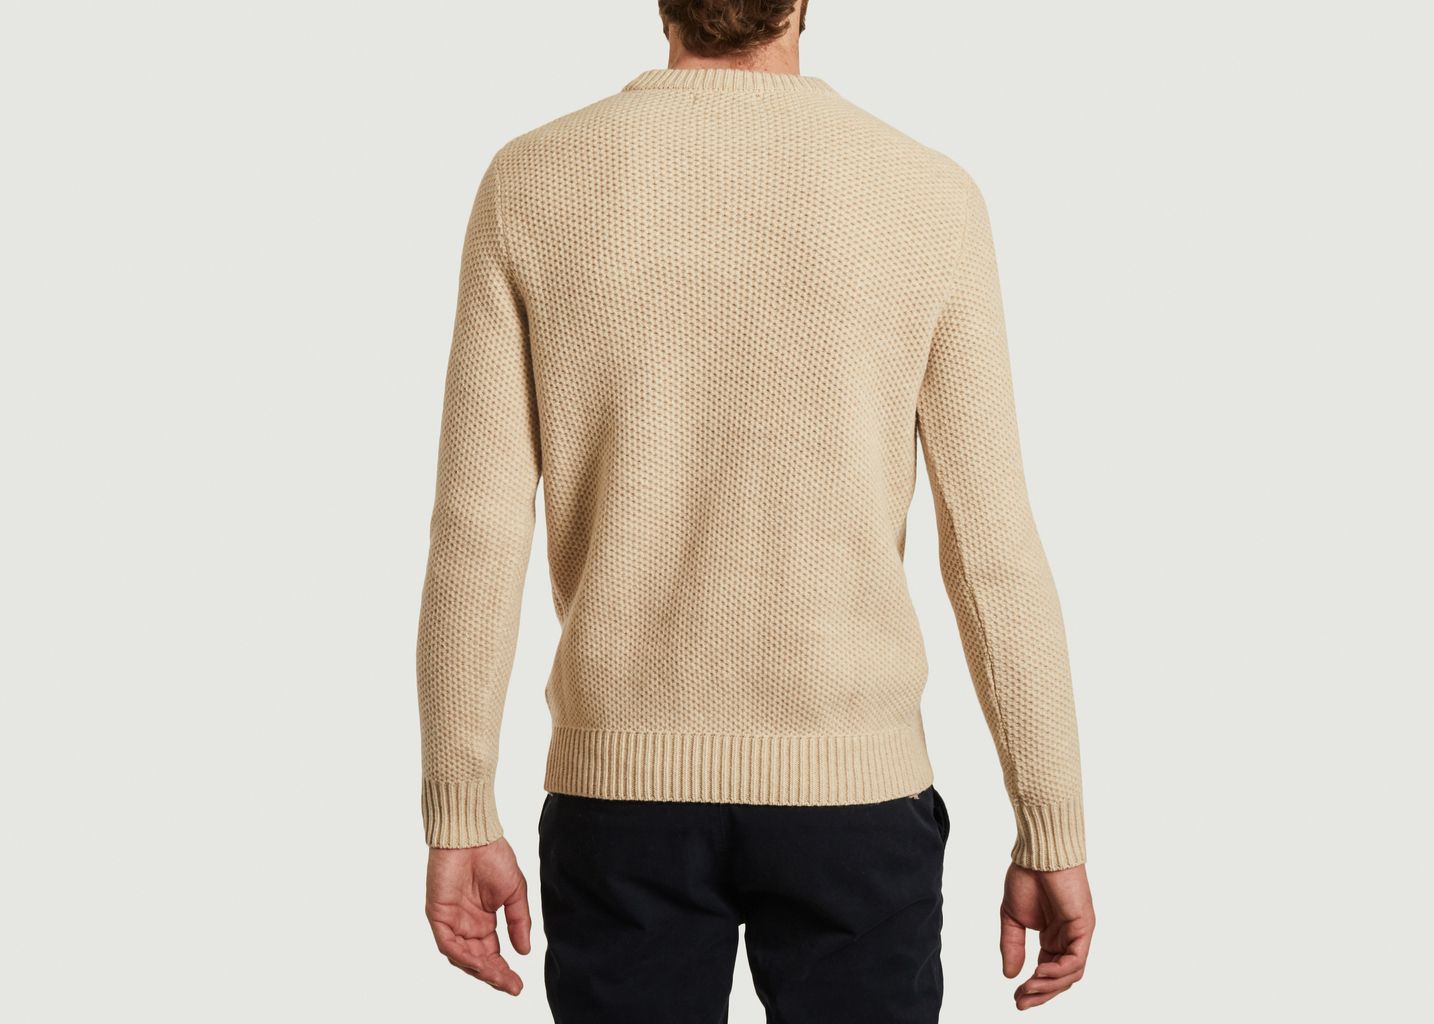 Sablons honeycomb sweater - Olow